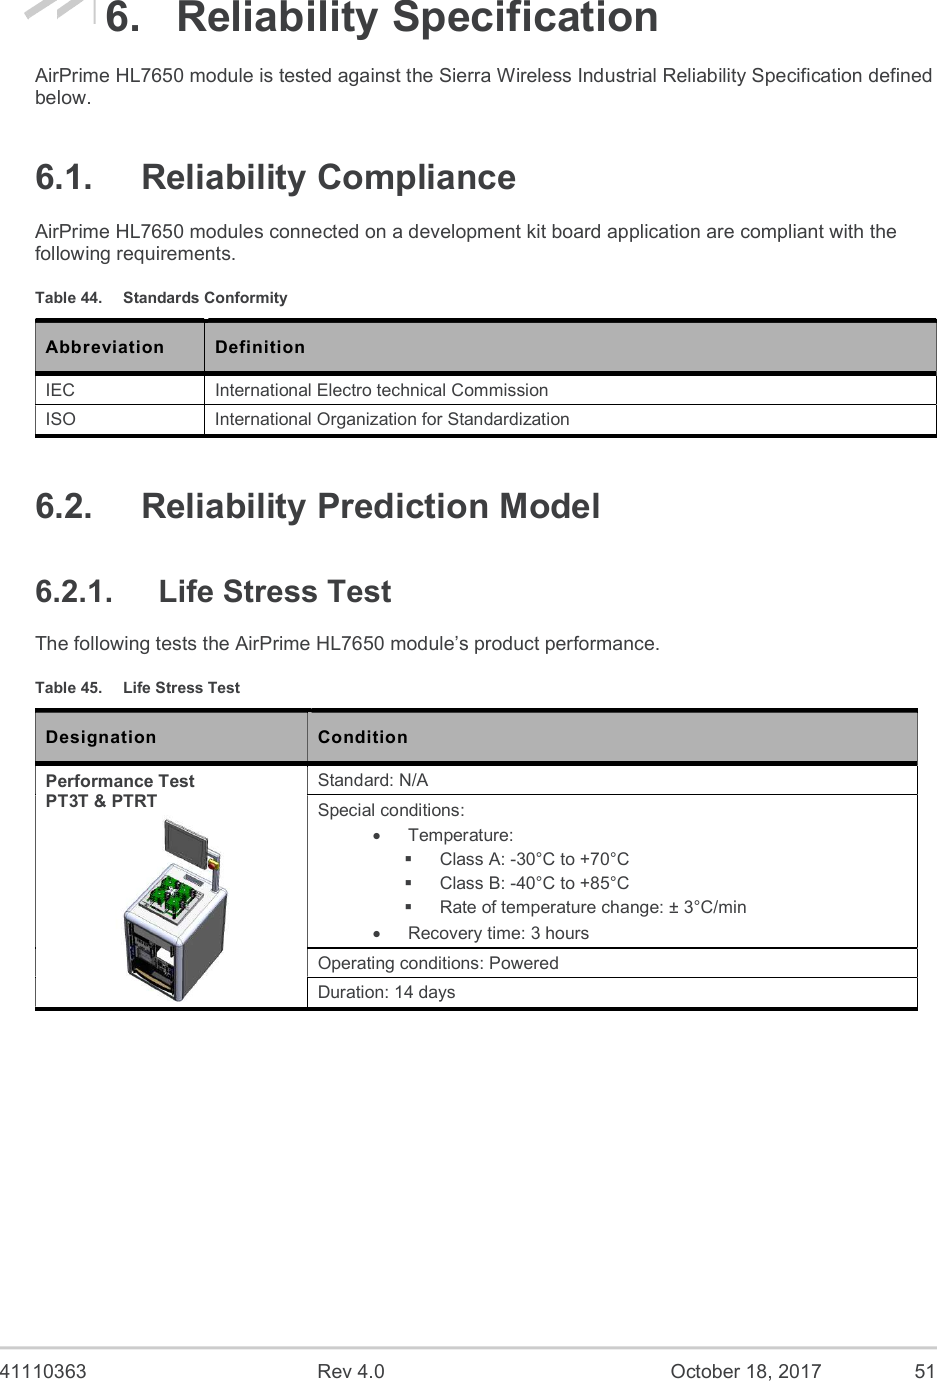  41110363  Rev 4.0  October 18, 2017  51 6.  Reliability Specification AirPrime HL7650 module is tested against the Sierra Wireless Industrial Reliability Specification defined below. 6.1.  Reliability Compliance AirPrime HL7650 modules connected on a development kit board application are compliant with the following requirements. Table 44.  Standards Conformity Abbreviation Definition IEC  International Electro technical Commission  ISO   International Organization for Standardization 6.2.  Reliability Prediction Model 6.2.1.  Life Stress Test The following tests the AirPrime HL7650 module’s product performance. Table 45.  Life Stress Test Designation  Condition Performance Test PT3T &amp; PTRT  Standard: N/A Special conditions:   Temperature:   Class A: -30°C to +70°C   Class B: -40°C to +85°C   Rate of temperature change: ± 3°C/min   Recovery time: 3 hours Operating conditions: Powered Duration: 14 days 